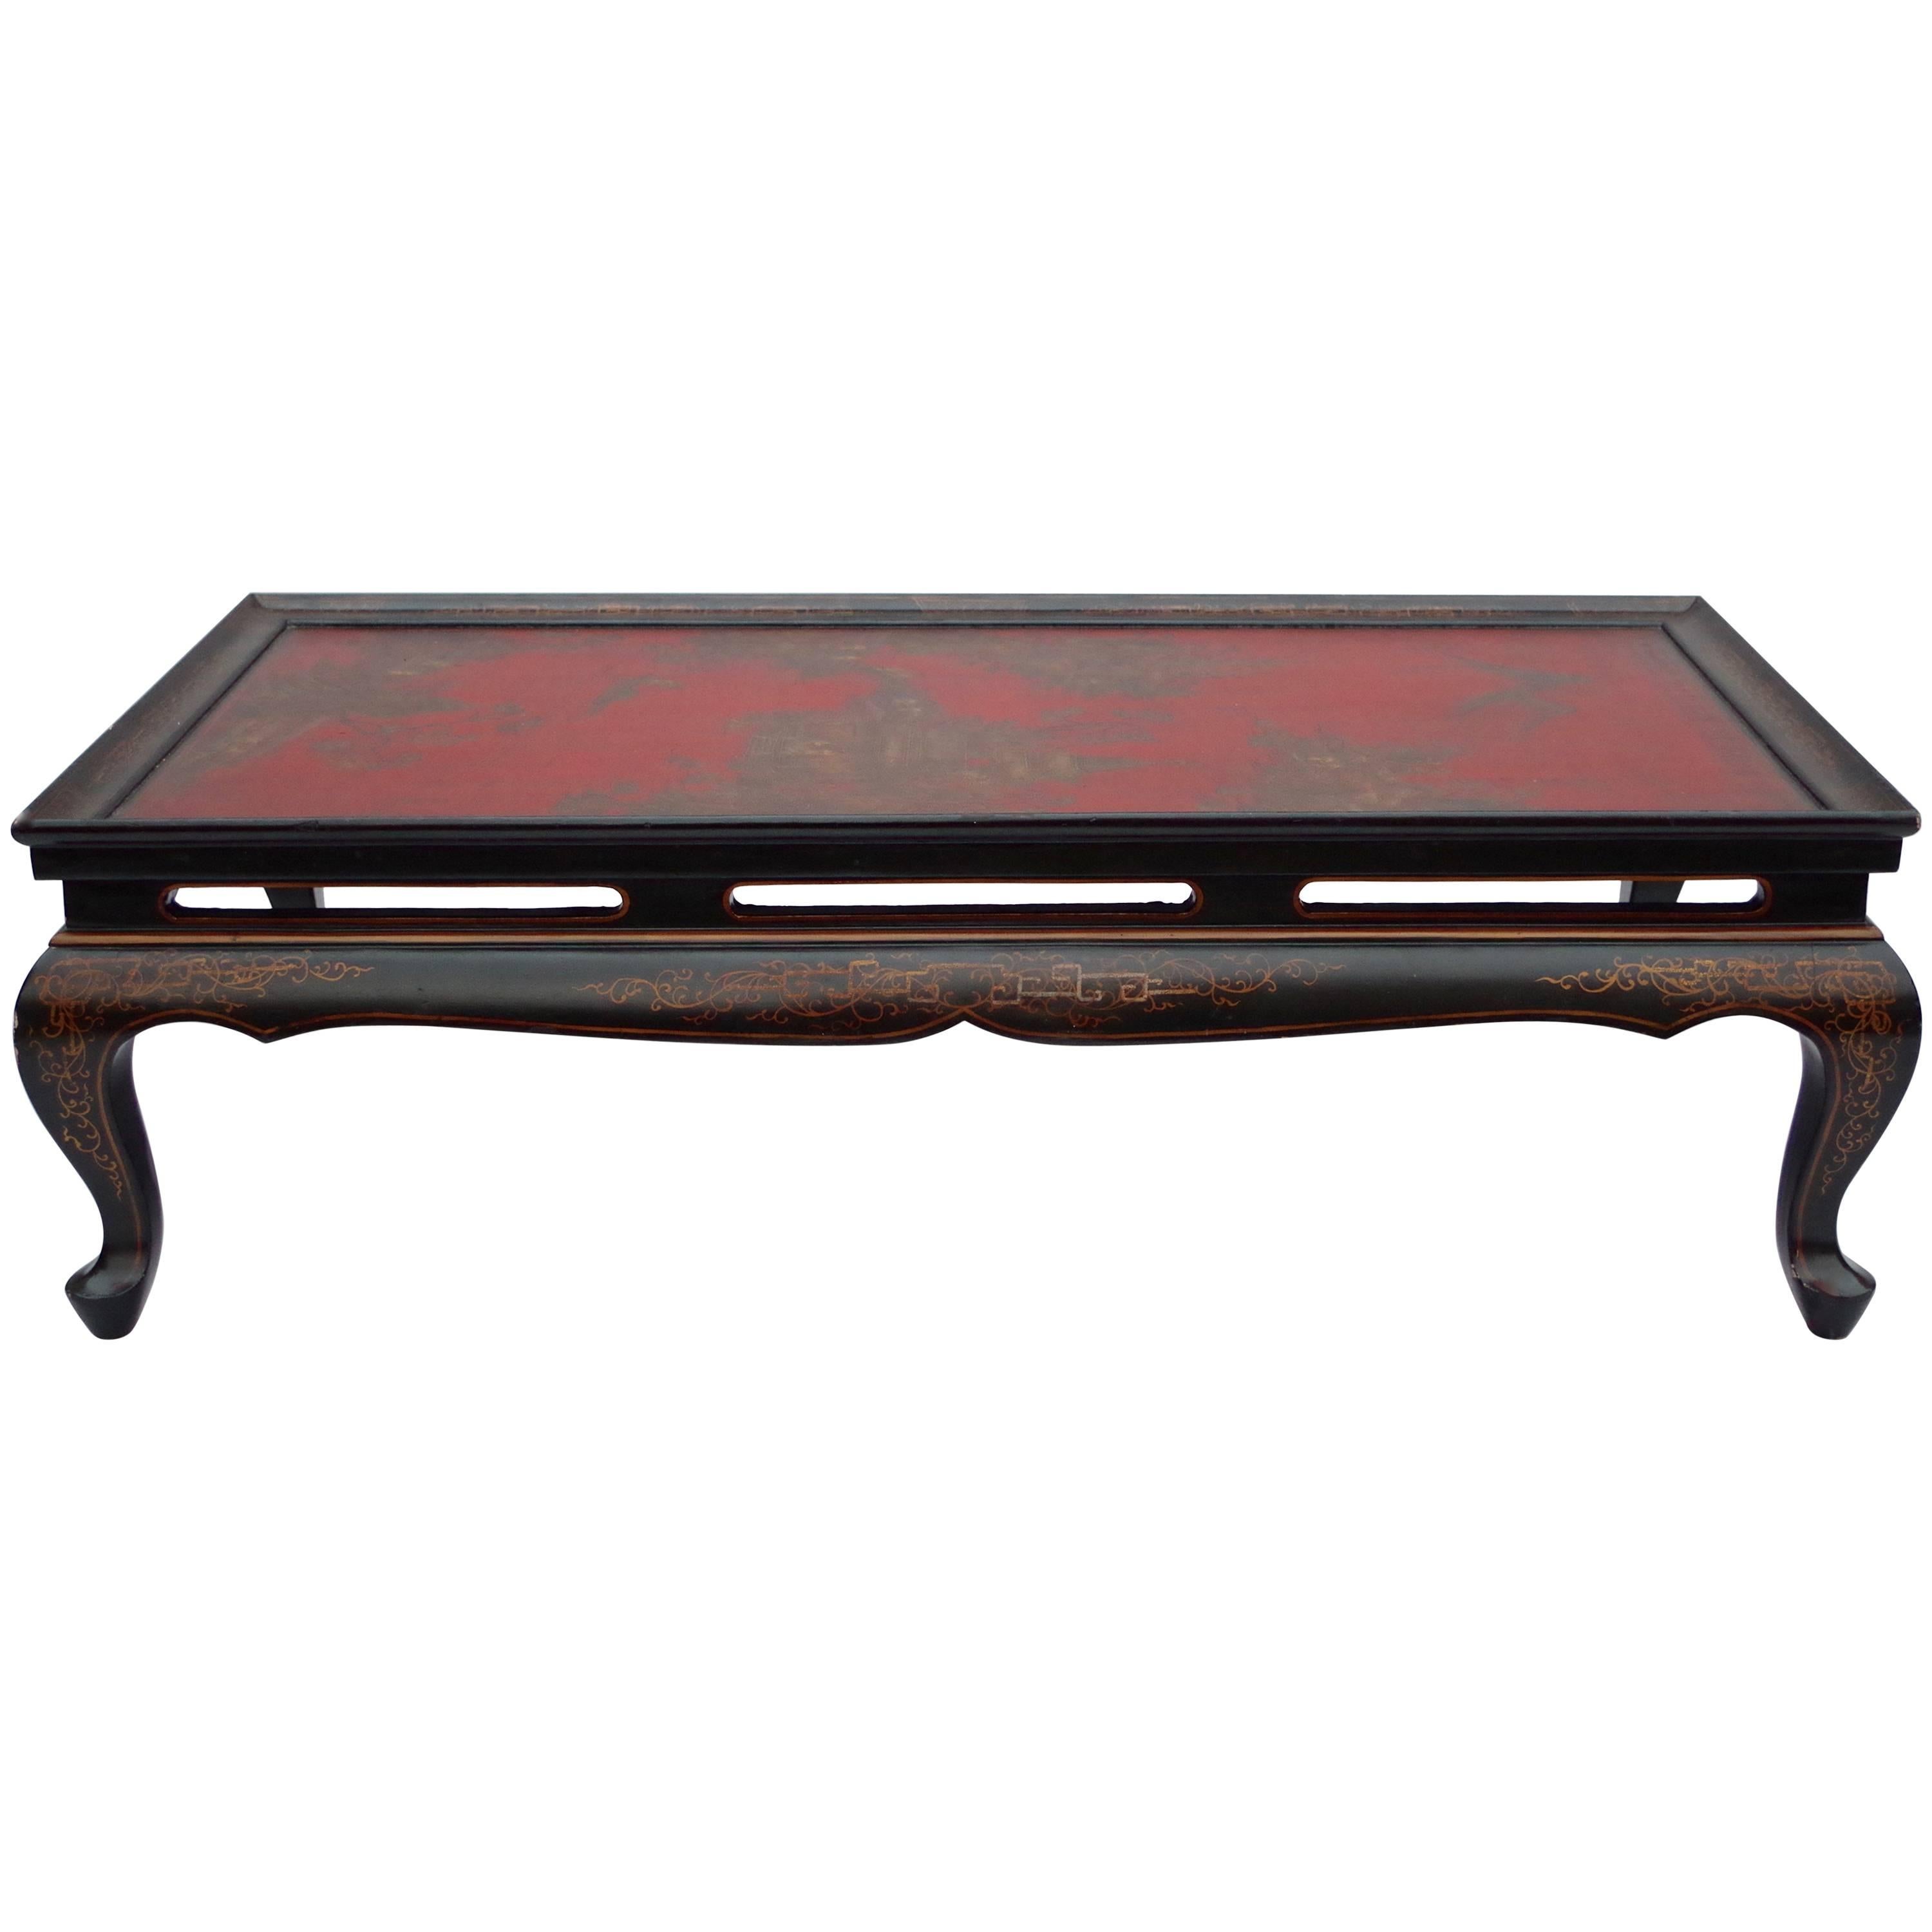 Black and Red Japanese Lacquer Coffee Table, circa 1950